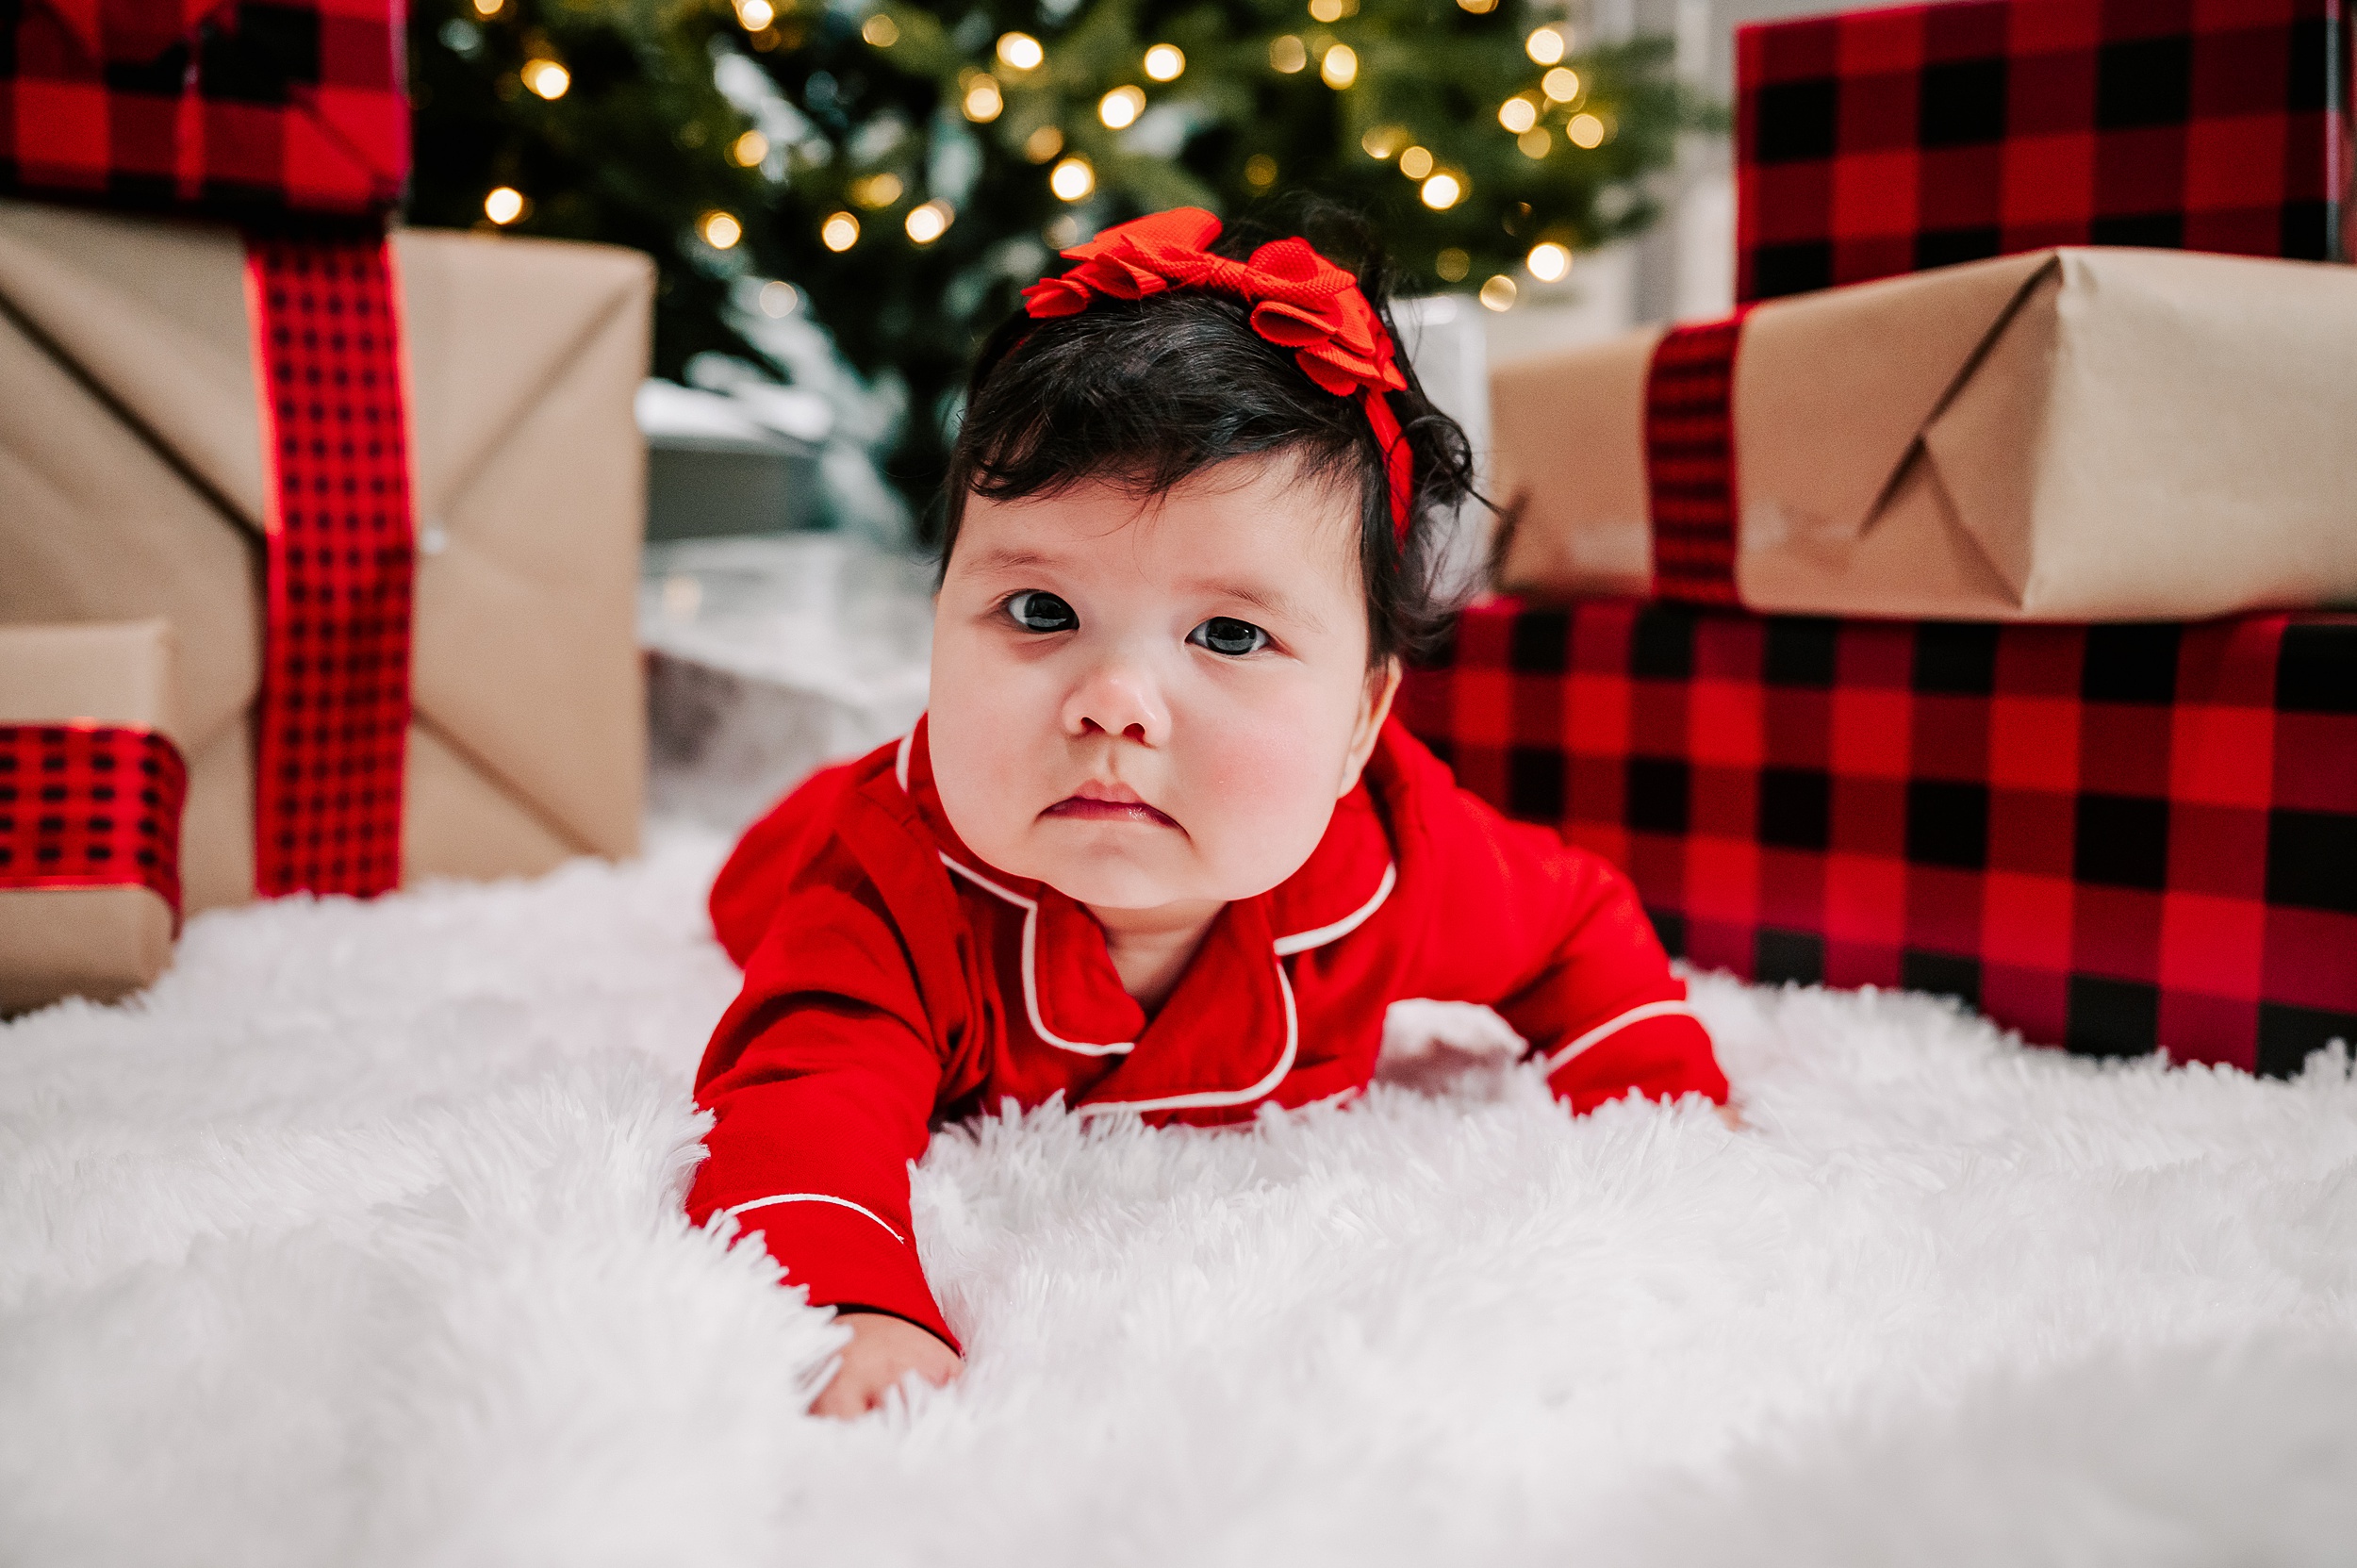 An infant girl crawls on a white shag rug surrounded by presents in red pajamas christmas tree farms near greensboro nc